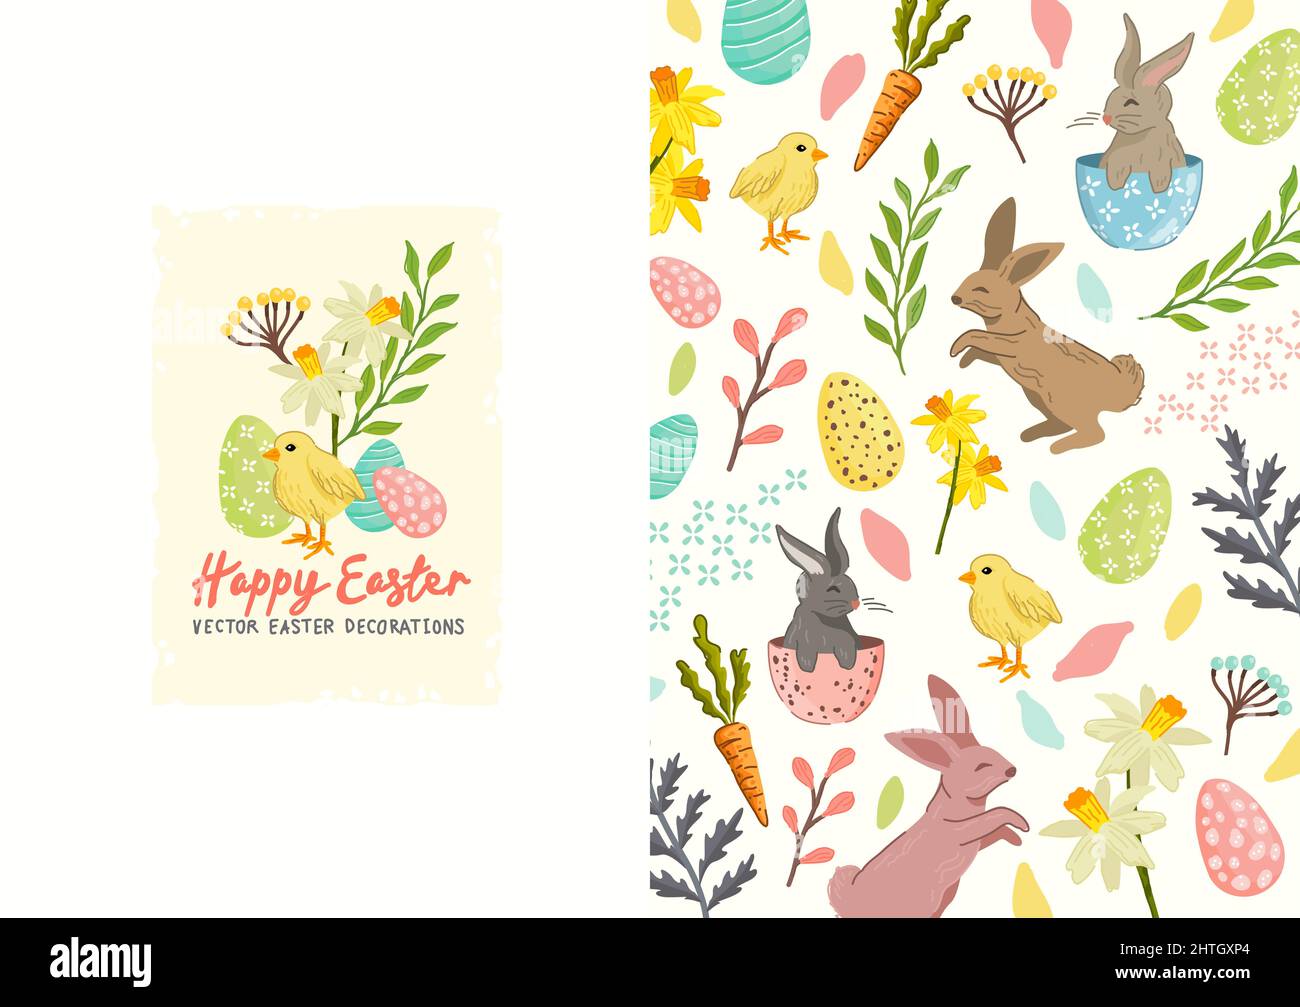 Festive spring and easter decorations layout design. Vector illustration Stock Vector